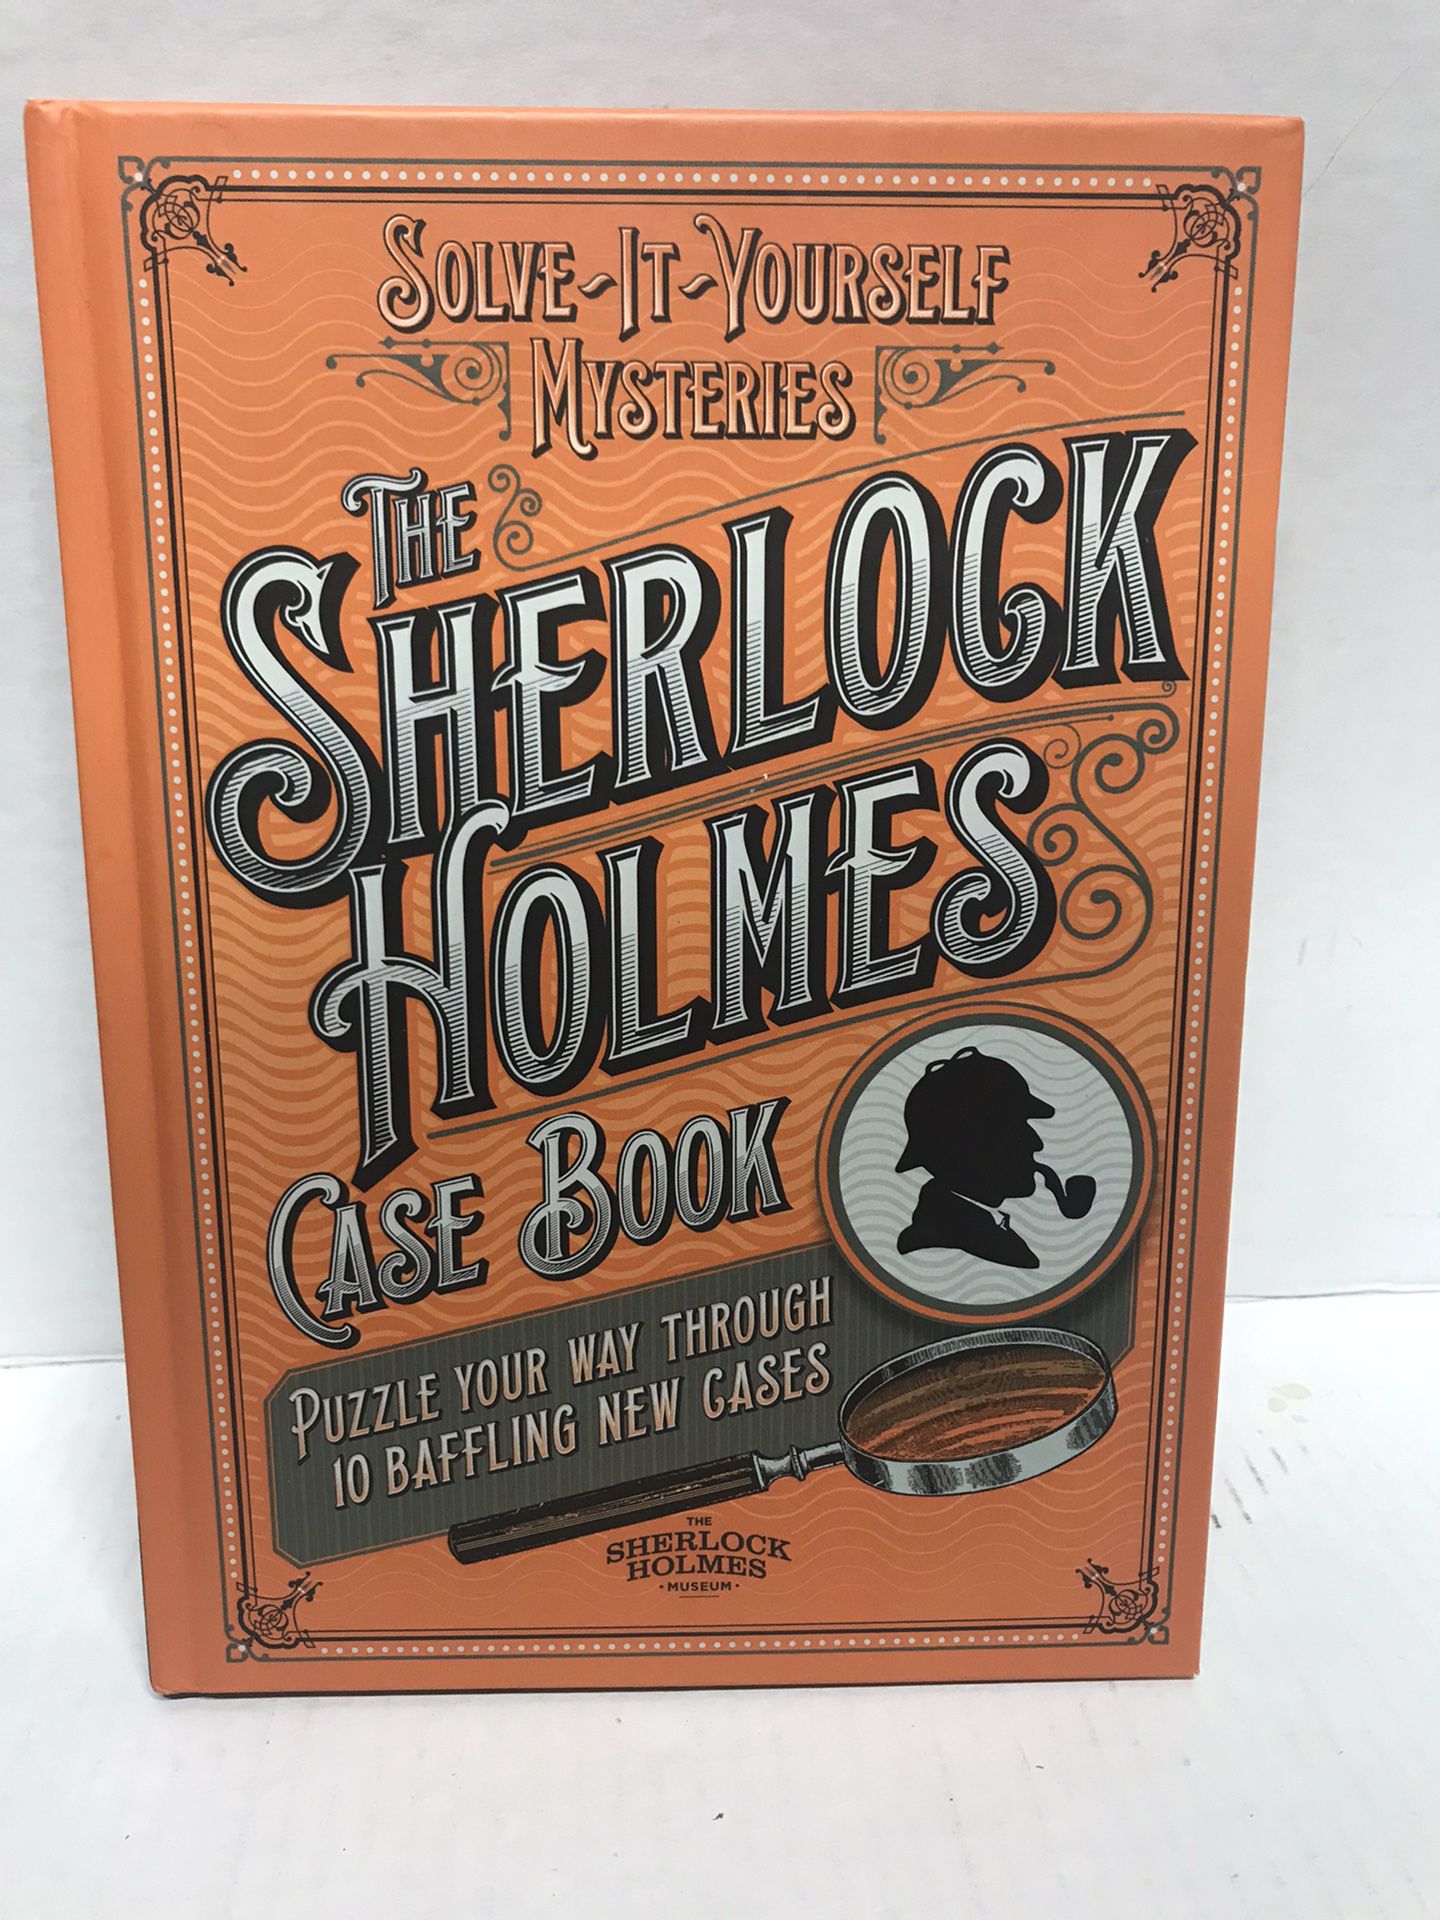 Solve it yourself mysteries, the Sherlock Holmes case book